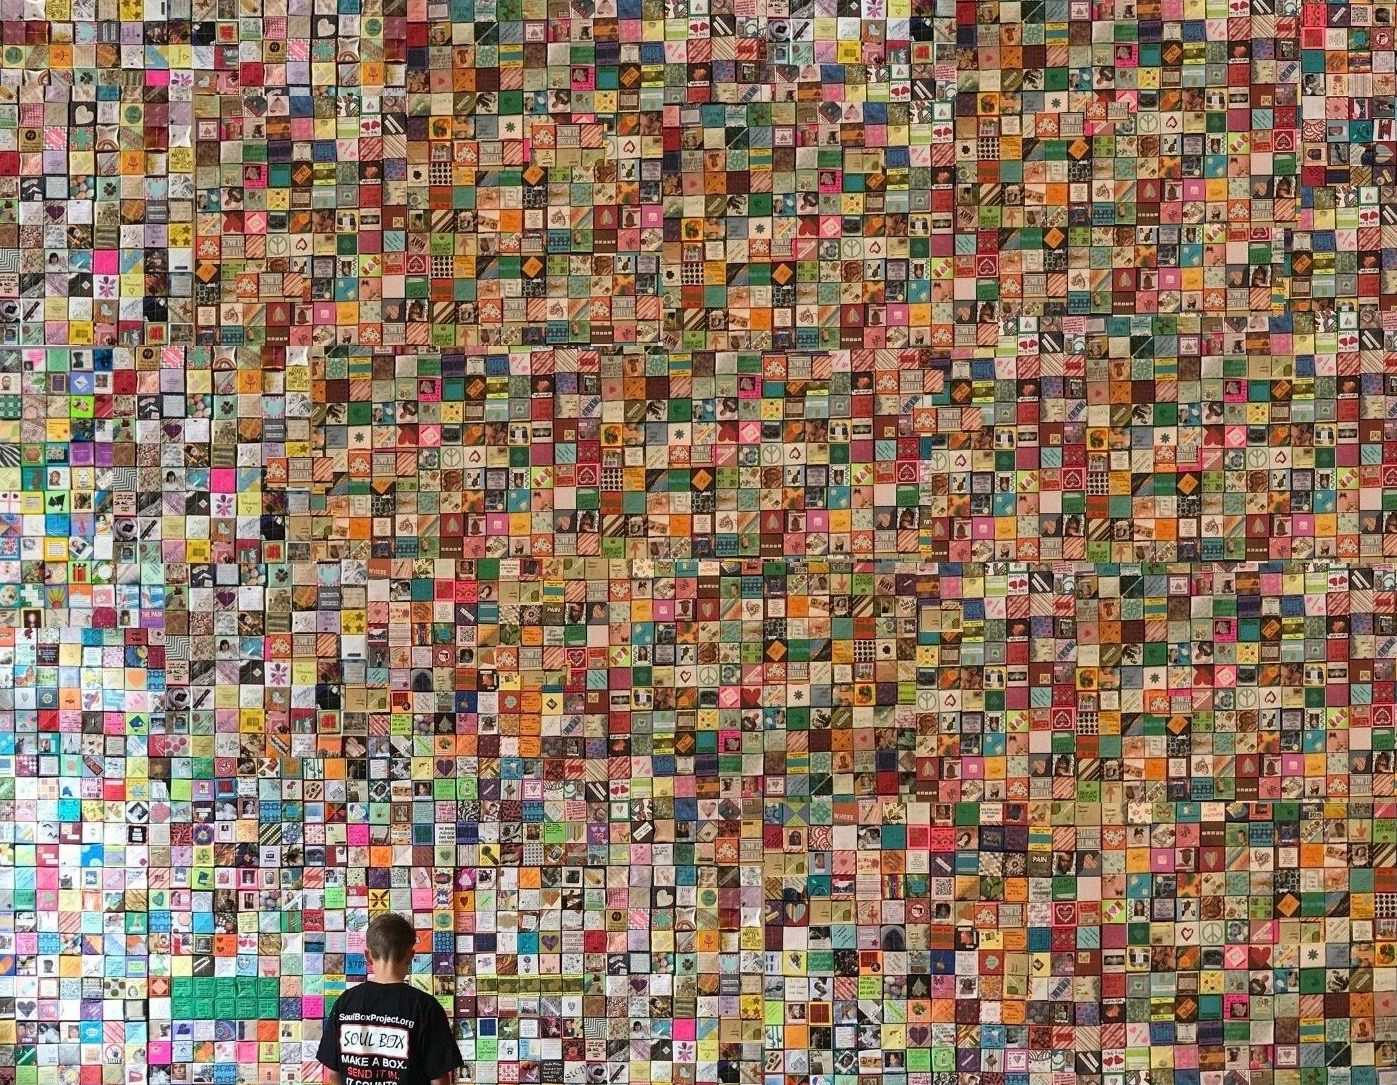 Boy looks at wall of Soul Boxes representing one month of deaths